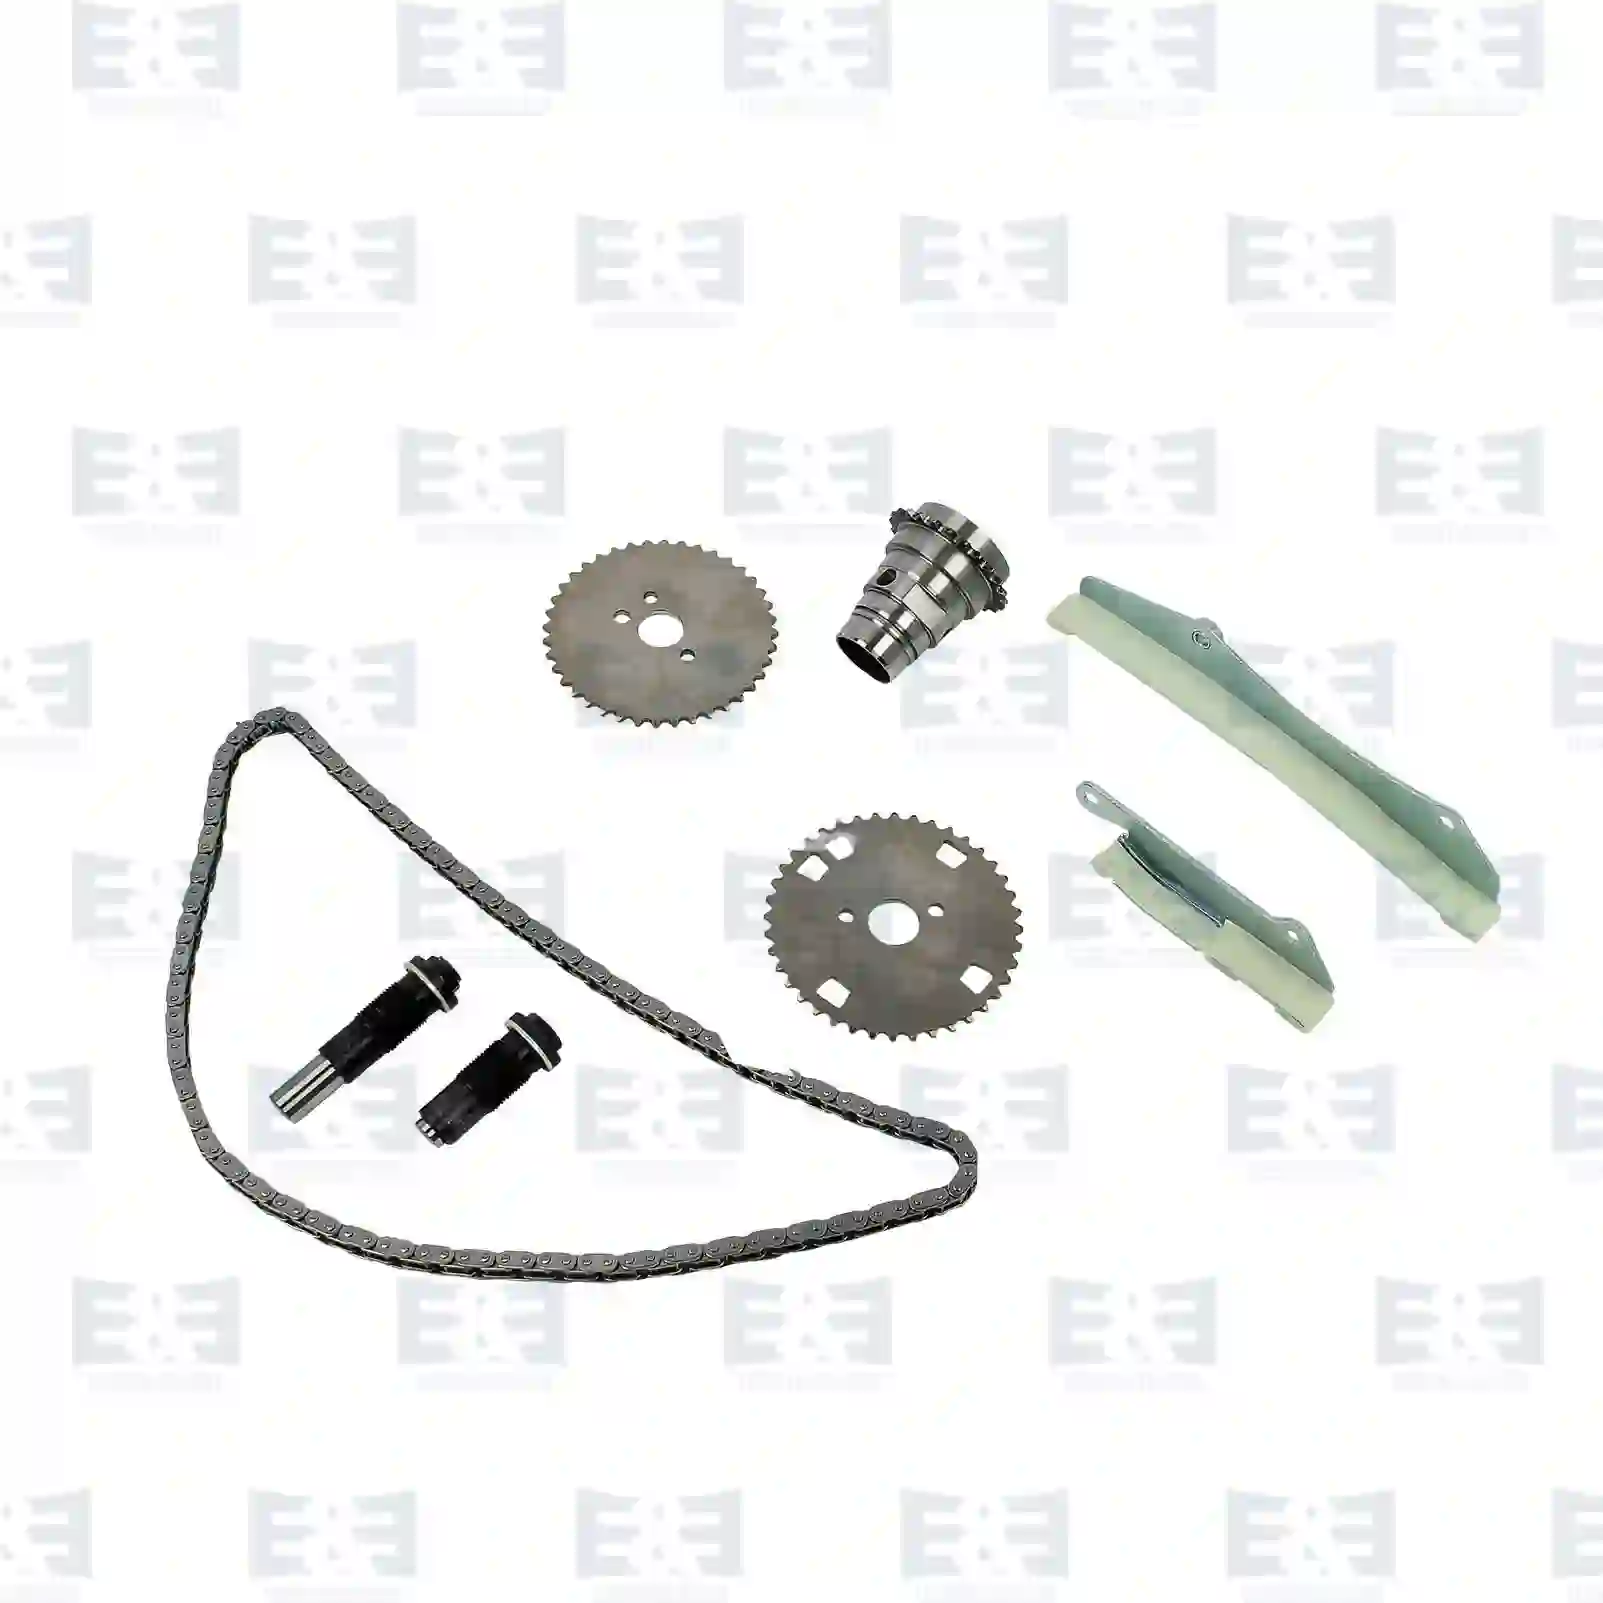 Timing Case Timing chain kit, chain closed, EE No 2E2200158 ,  oem no:0831P9, 0831P9S, 504091969, 5801375562, 5801628729, 504091969, 5801375562, 5801514998, 5801628729, 5802009618, 0831P9, 0831P9S, ZG02206-0008 E&E Truck Spare Parts | Truck Spare Parts, Auotomotive Spare Parts